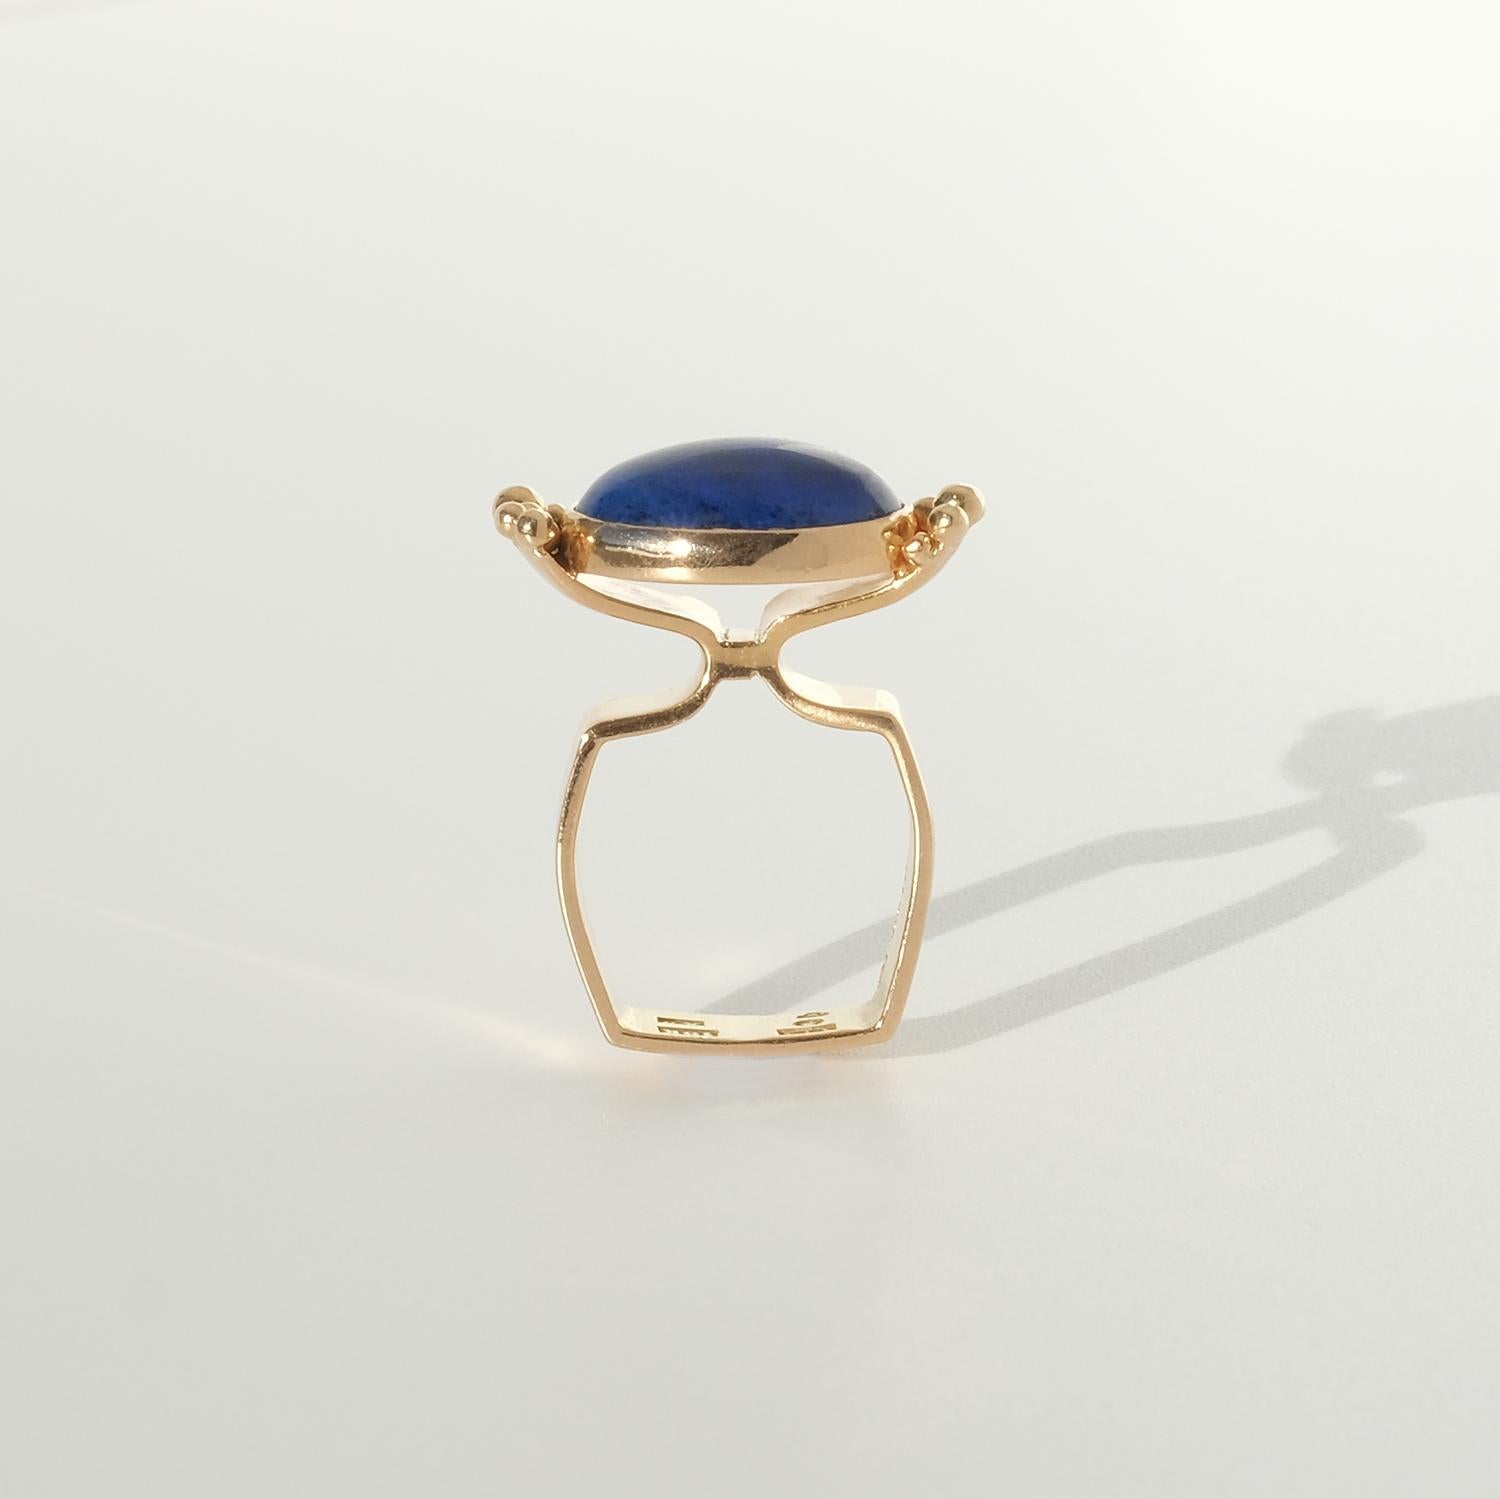 Women's or Men's 18 K Gold Ring with a Cabochon Cut Lapis Lazuli Stone, Made in 1972 For Sale